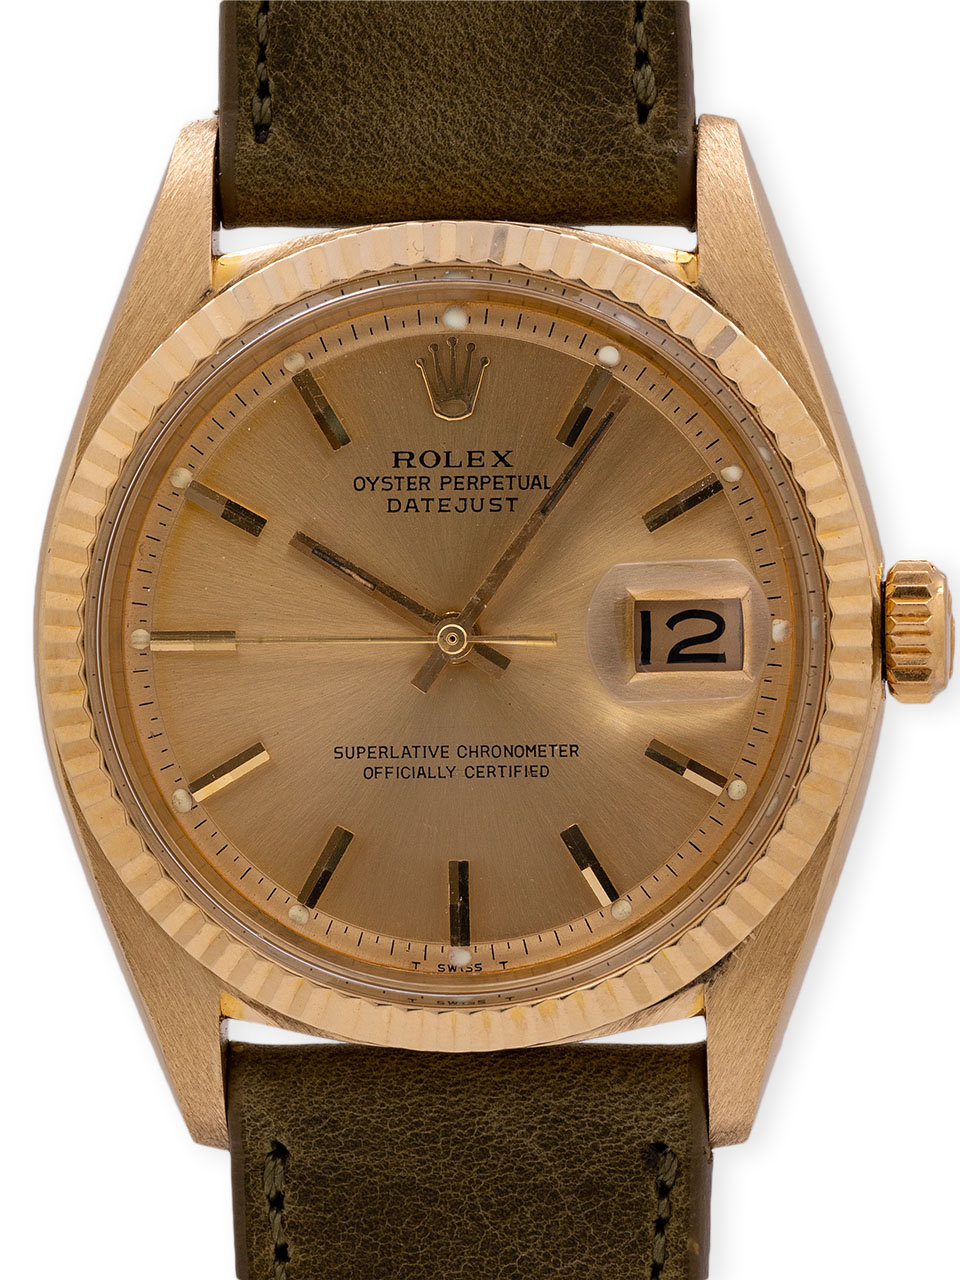 Lady's Rolex 18K Gold Oyster Perpetual Datejust ref 6917 circa 1978